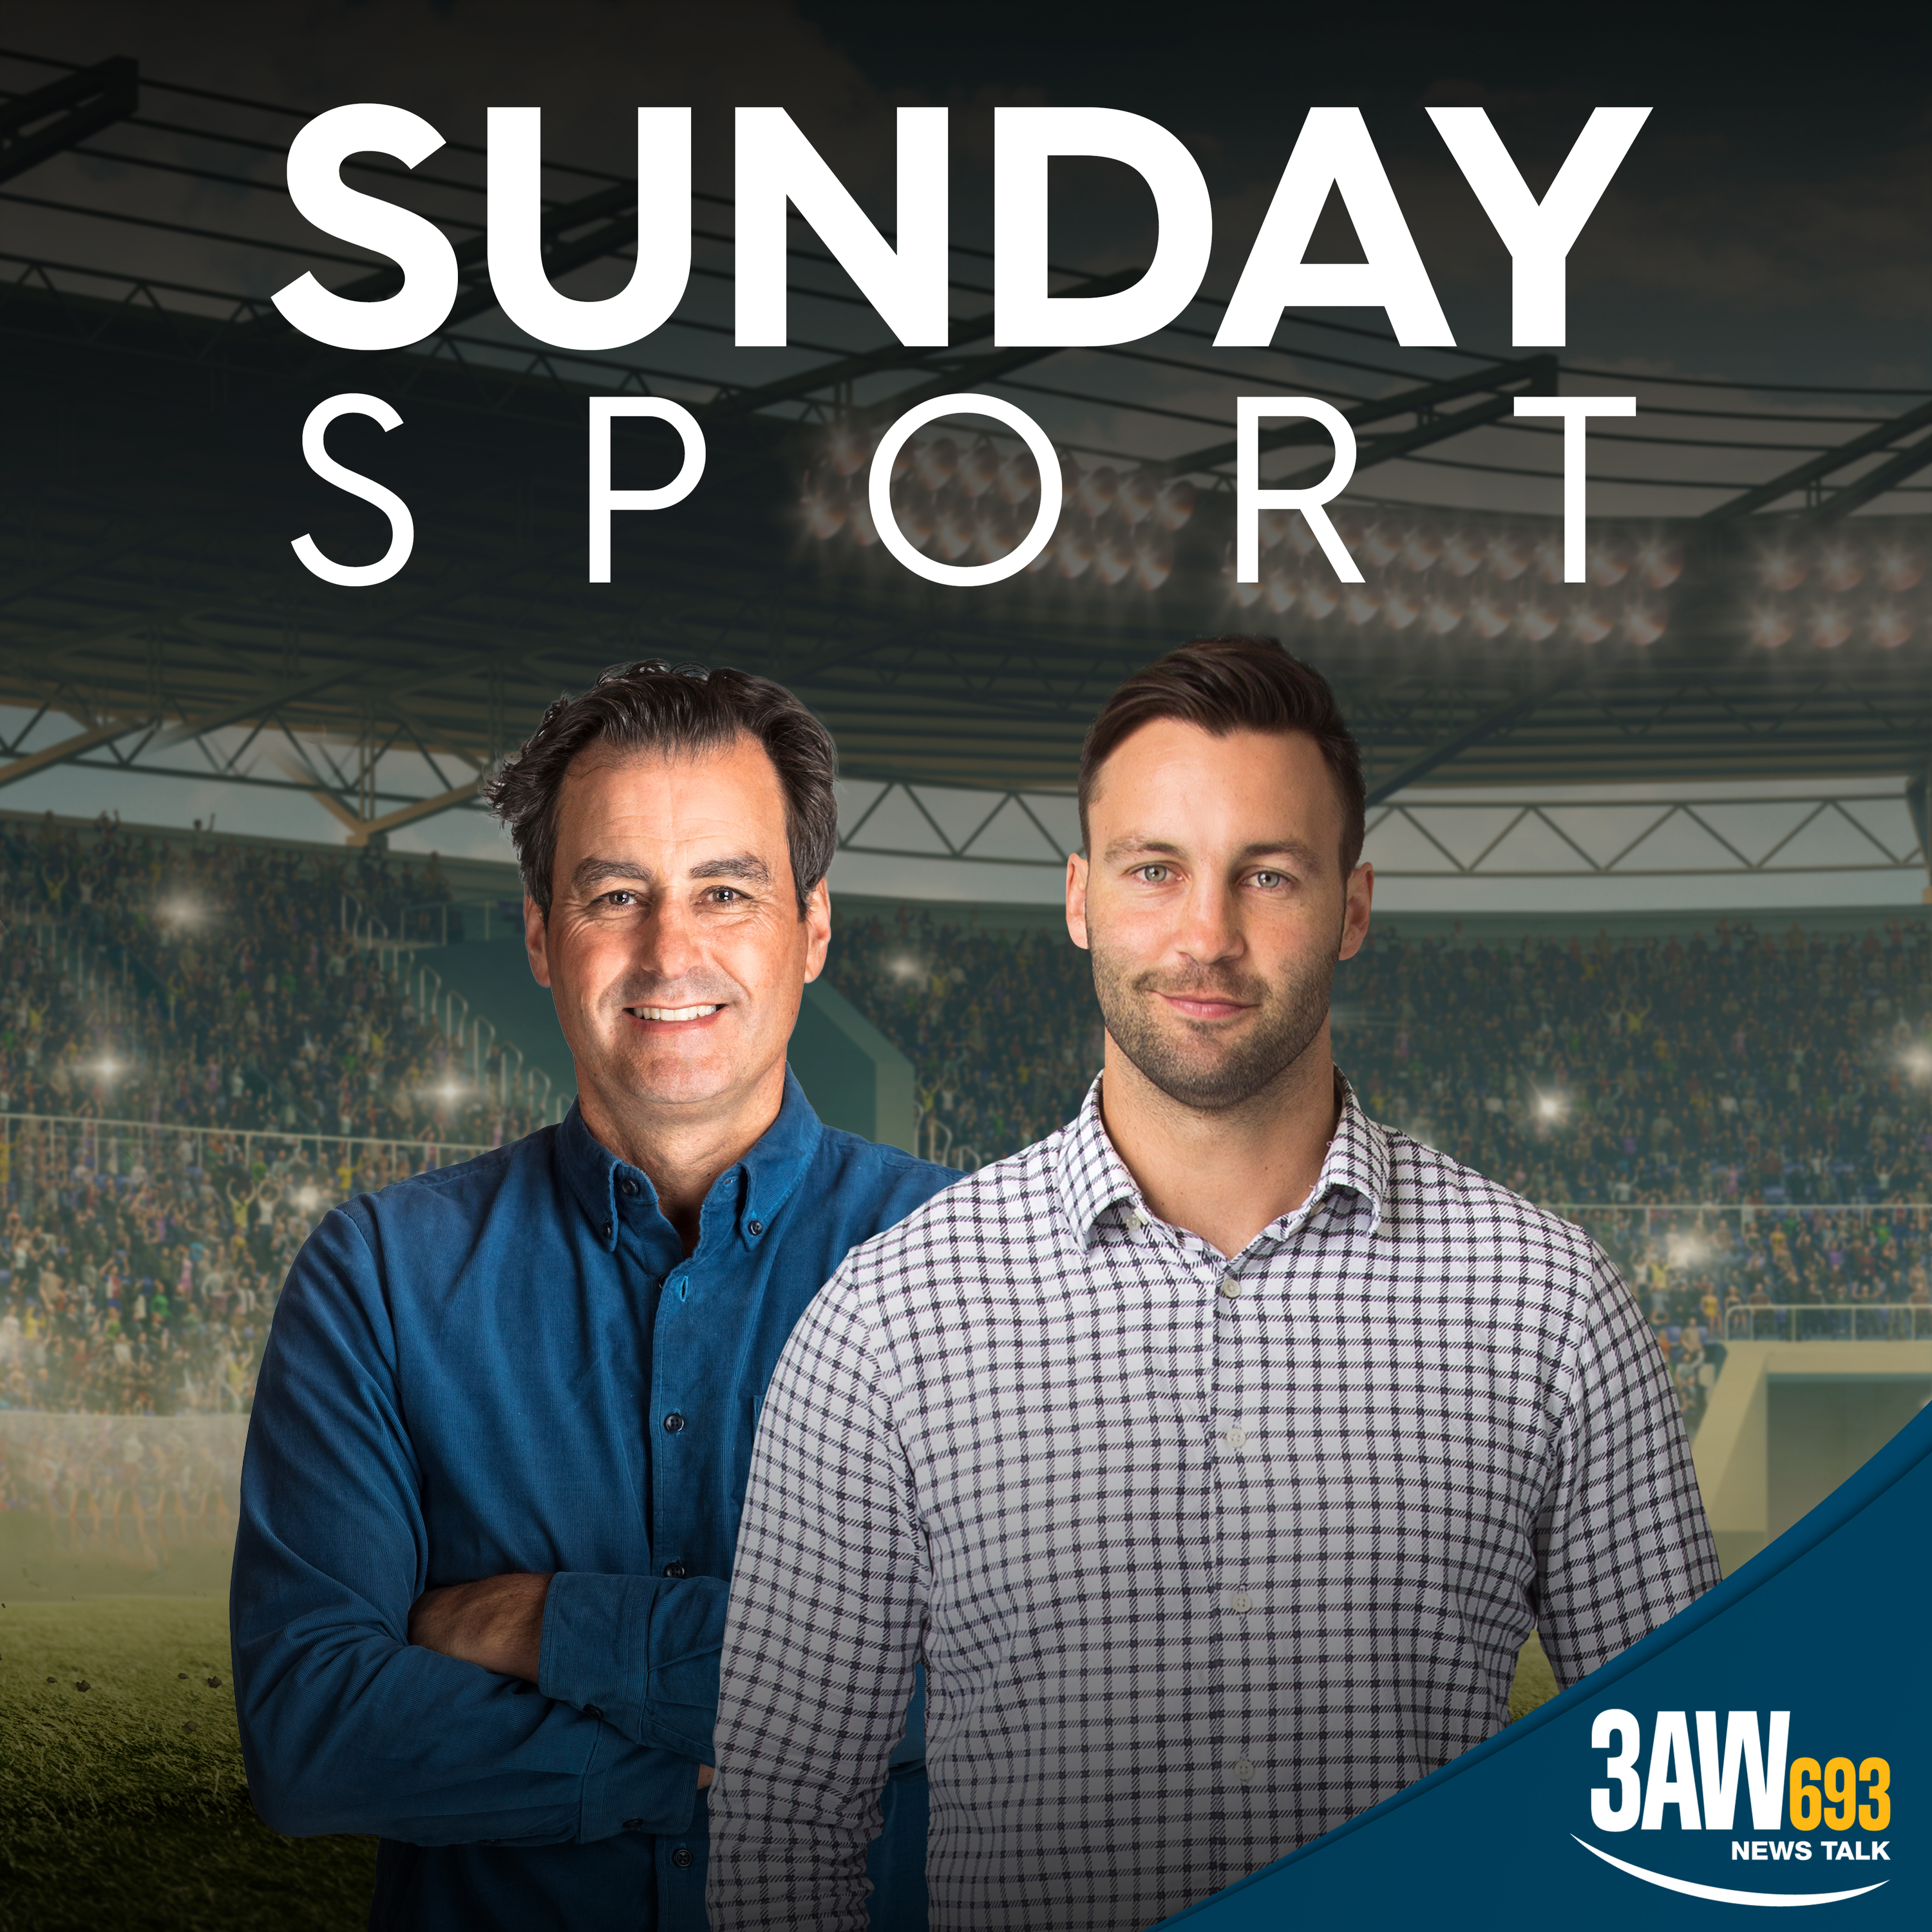 Sunday Sport with Mark Allen and Jimmy Bartel: Sunday, June 19